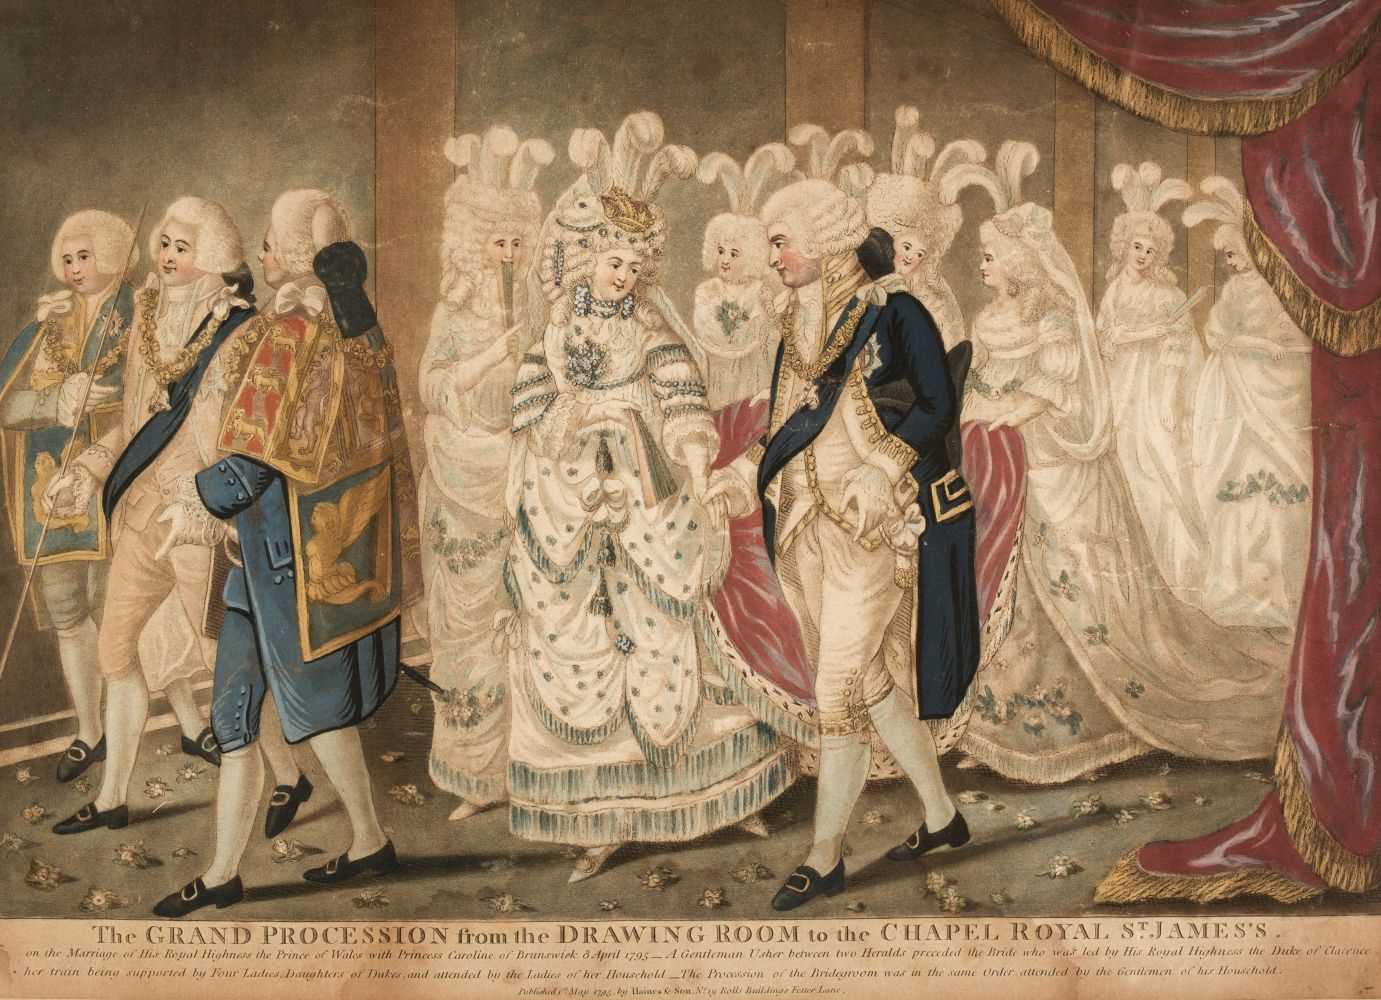 Lot 182 - George IV. The Marriage Ceremony of their Royal Highnesses the Prince & Princess of Wales